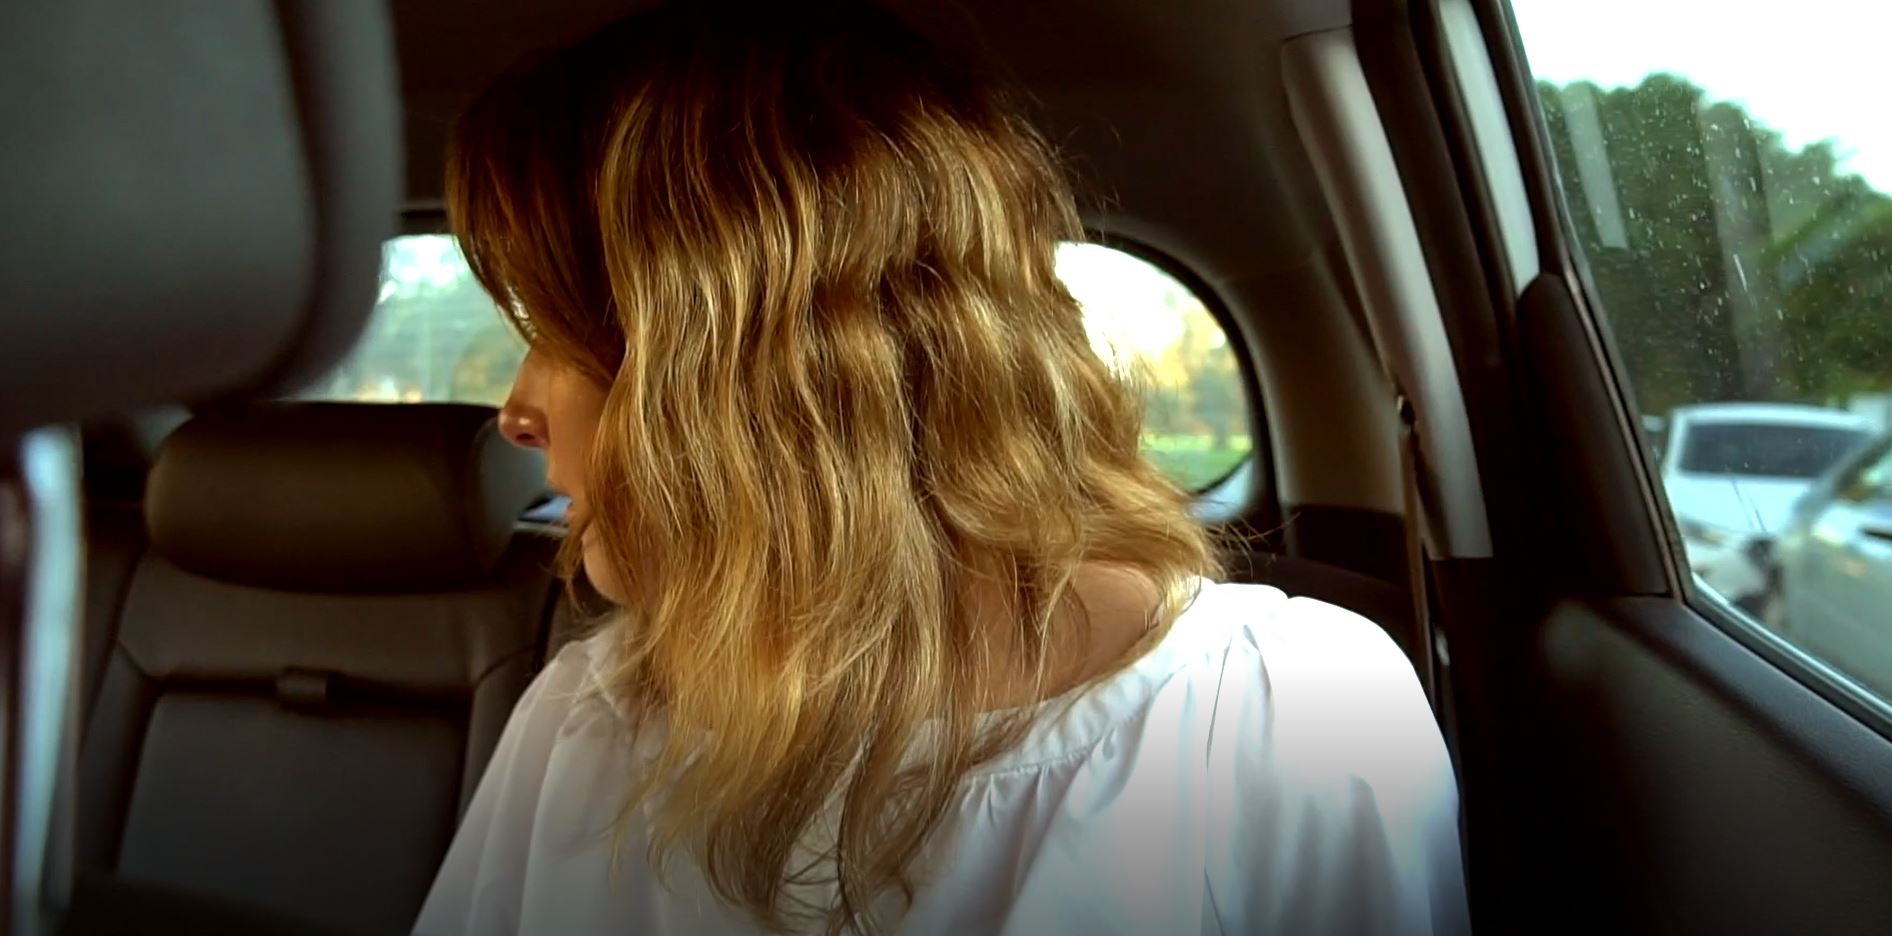 Photograph of the side of a girl's head. She is sitting in a car with grey interior, and she has shoulder length, wavy blonde hair.